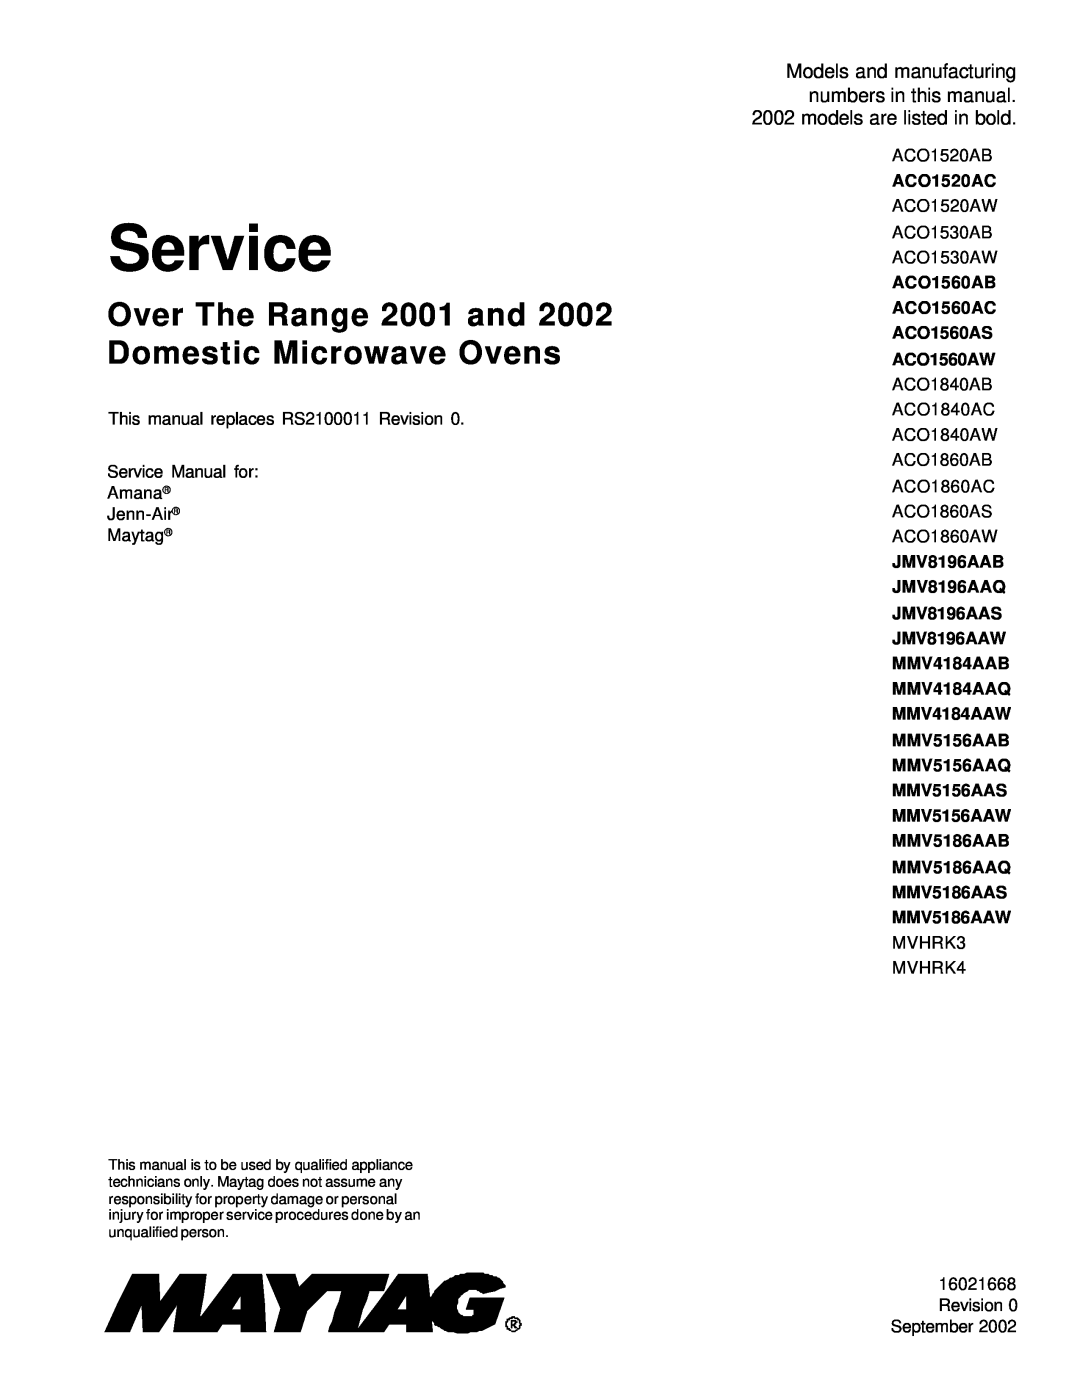 Maytag ACO1560AB service manual Over The Range 2001 and 2002 Domestic Microwave Ovens, Service, models are listed in bold 